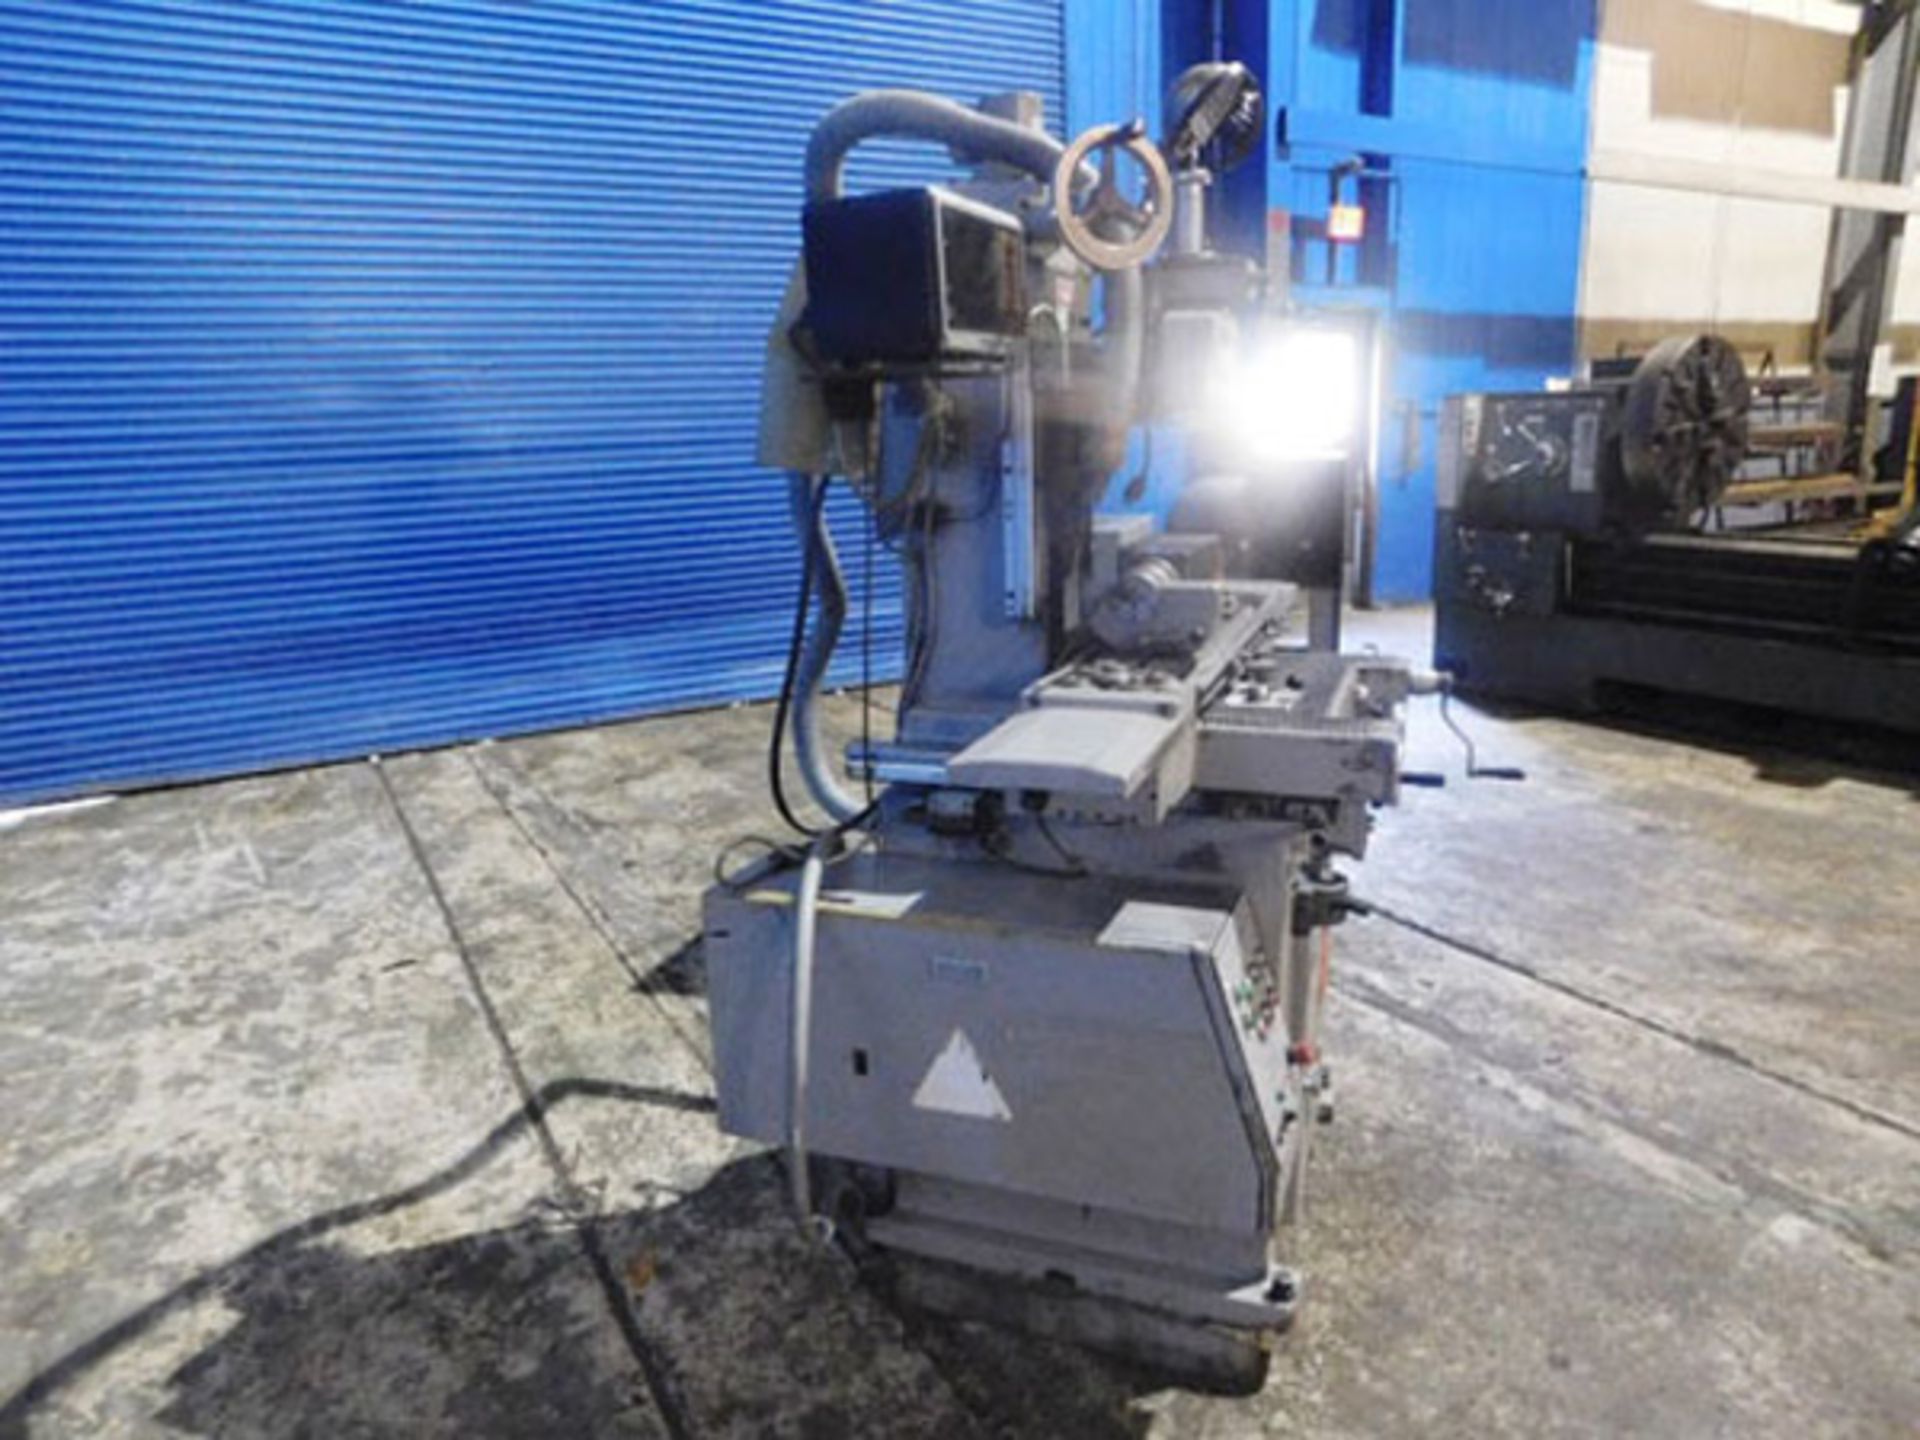 Nicco Automatic Hydraulic Surface Grinder | 6" x 18", Mdl: NFG-515H, S/N: D4020 - 7809P - Image 3 of 12